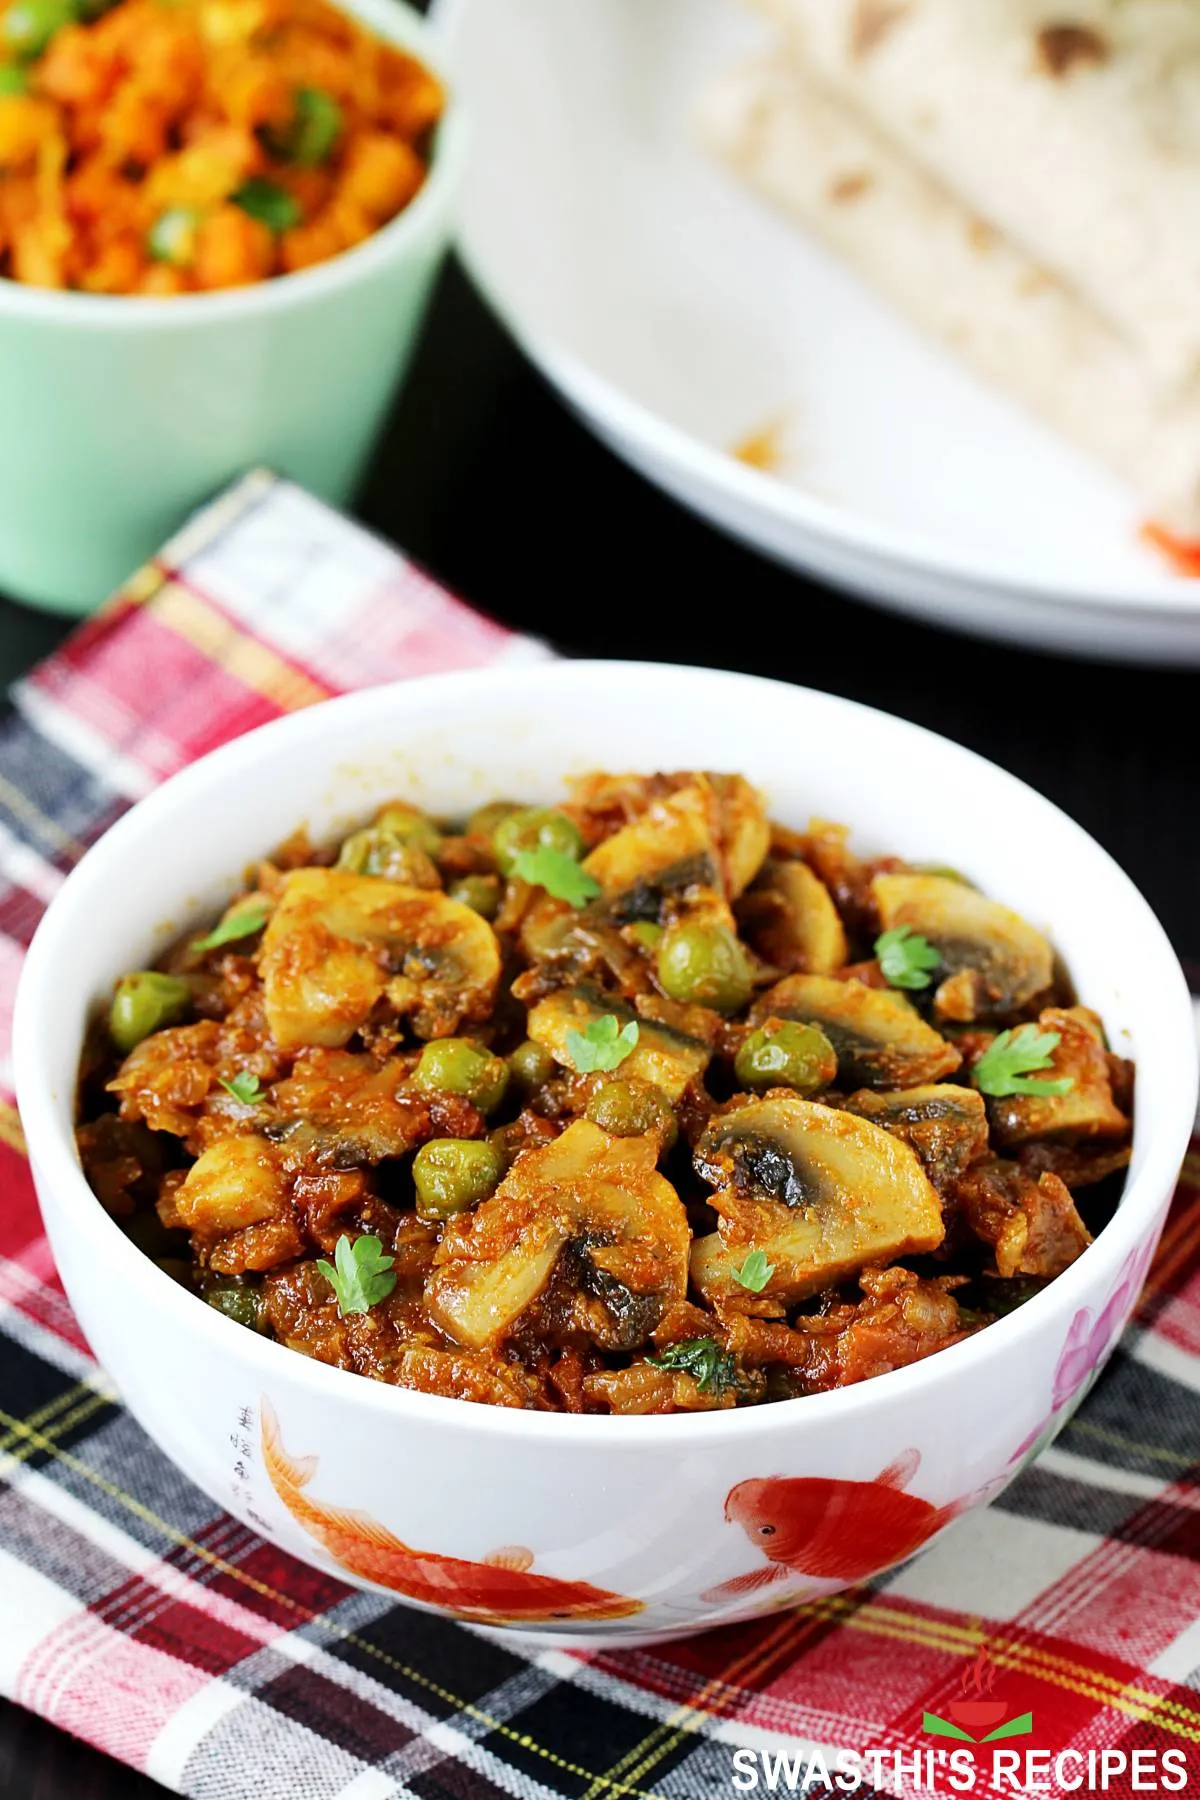 Matar Mushroom recipe made with button mushrooms peas and spices